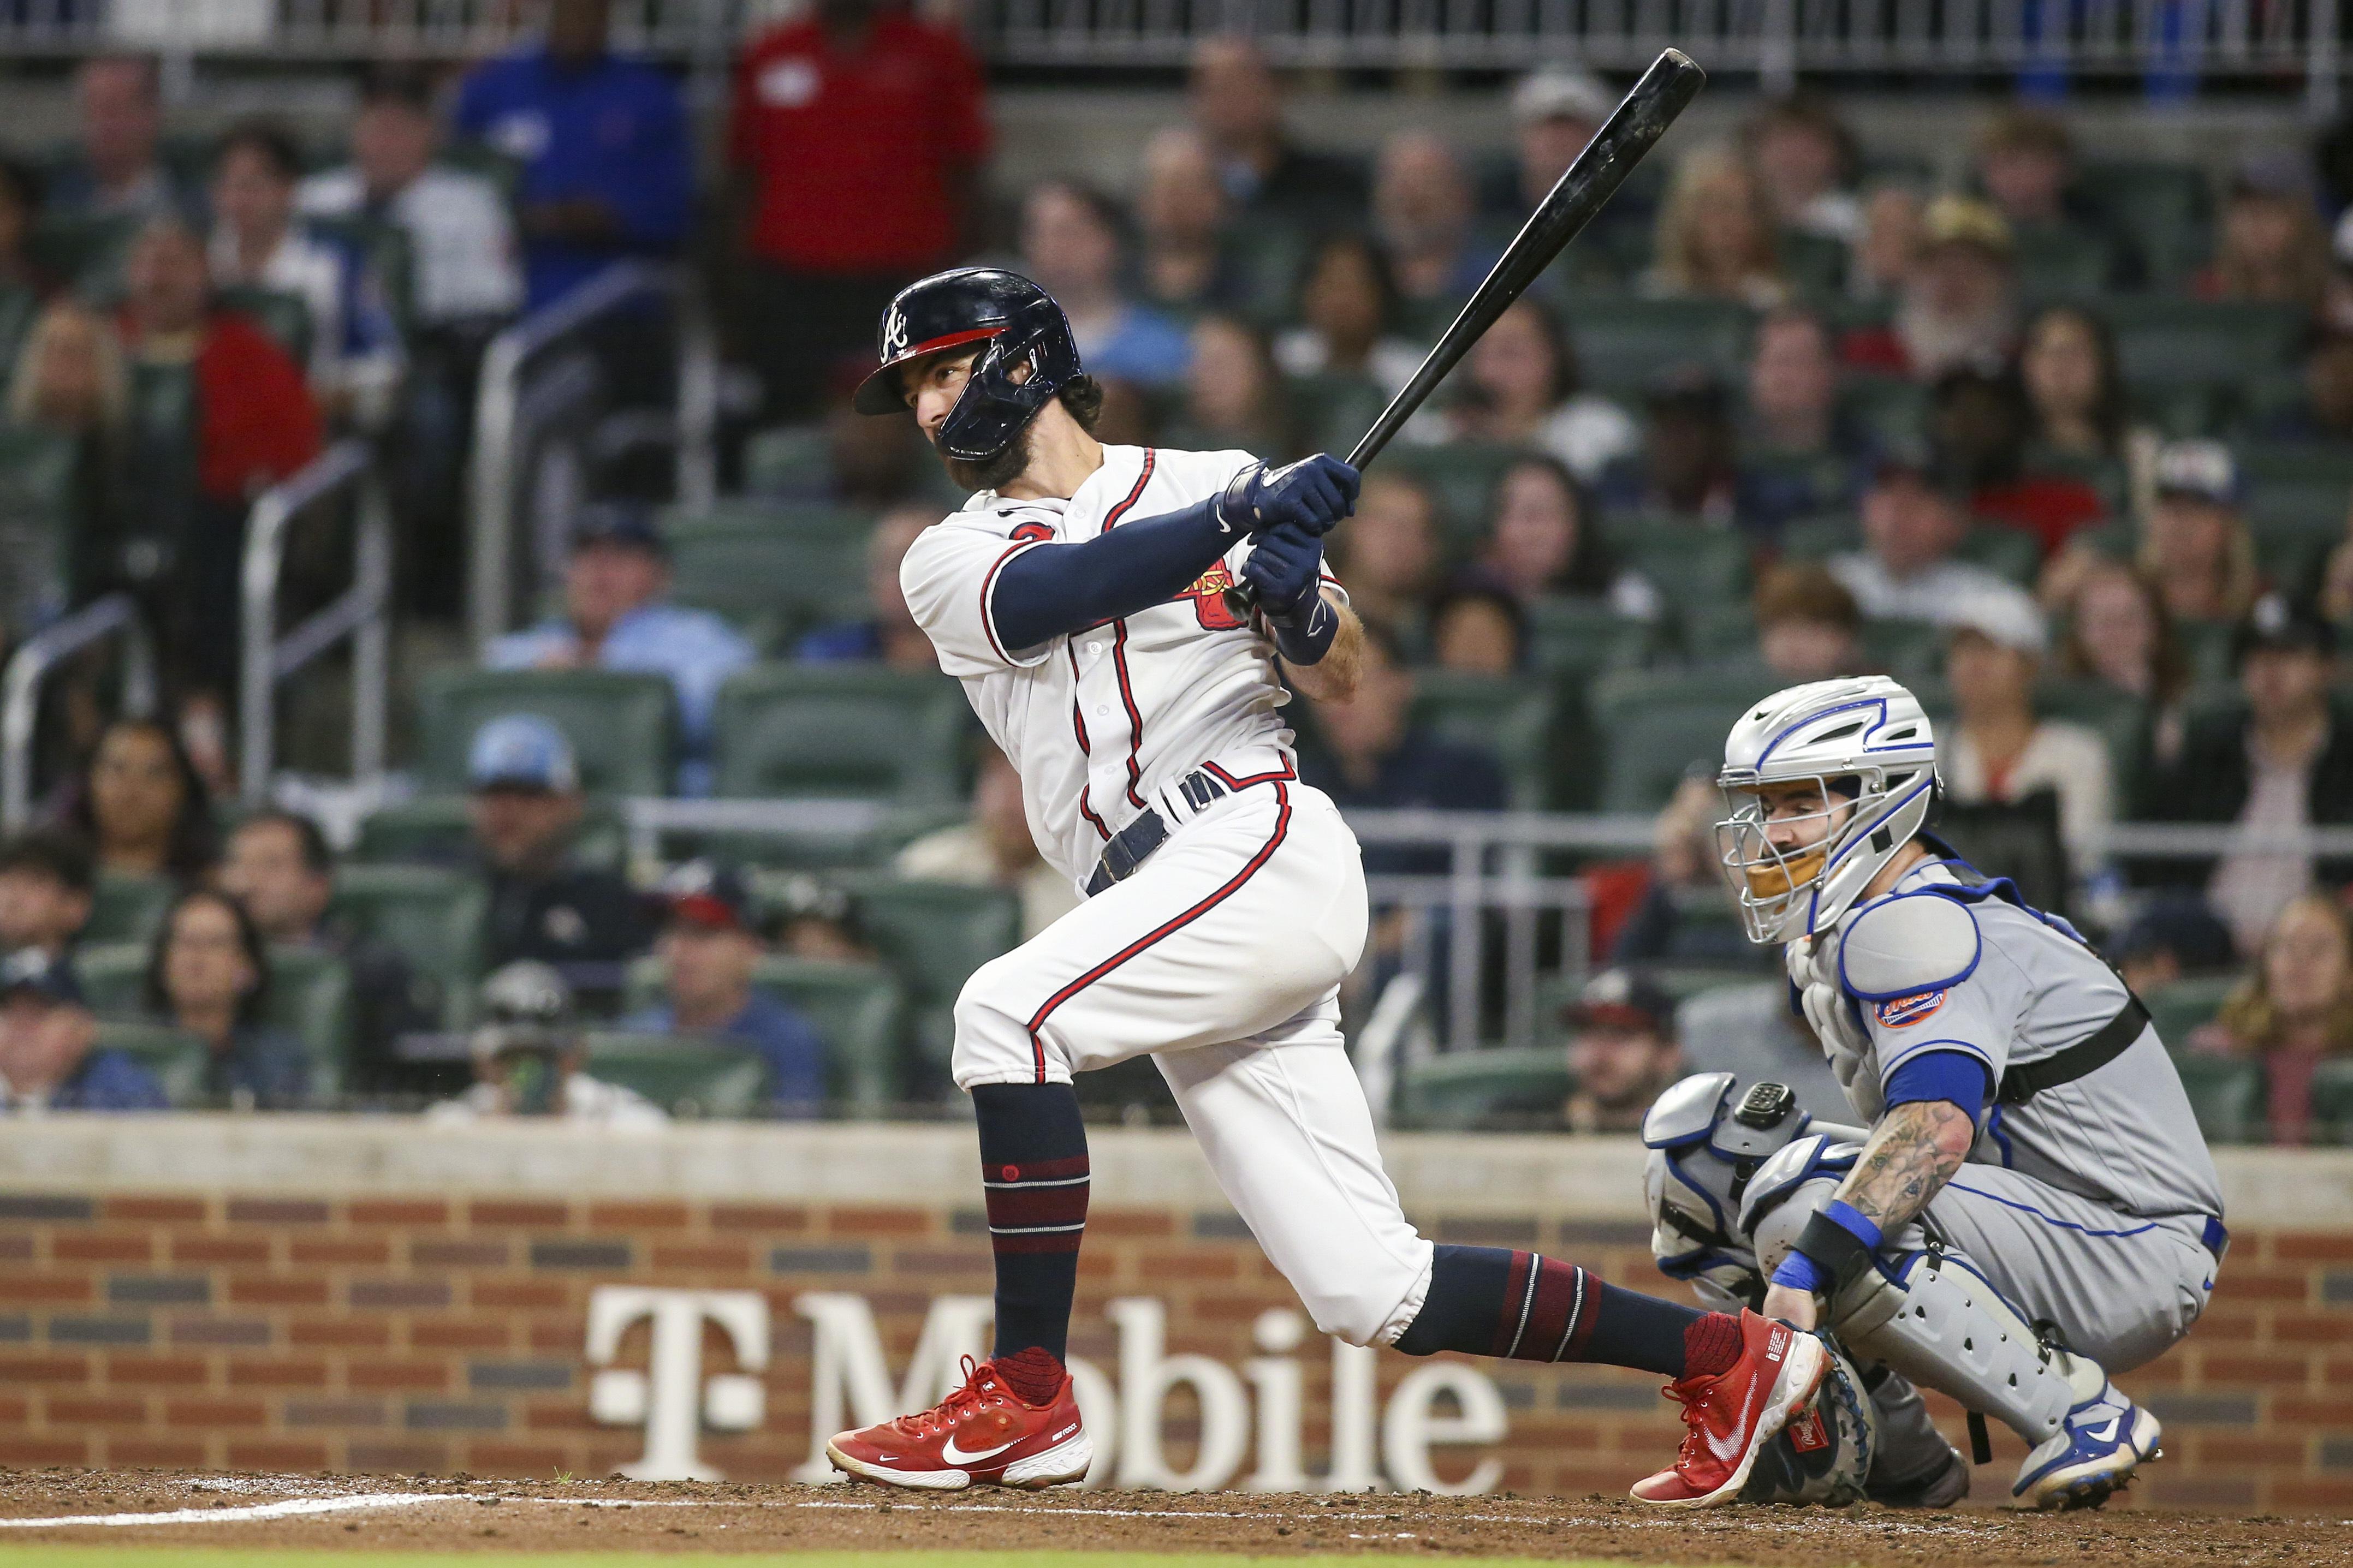 Dansby Swanson breaks up Jacob deGrom's no-hit bid with a two-run home run.  #MLB